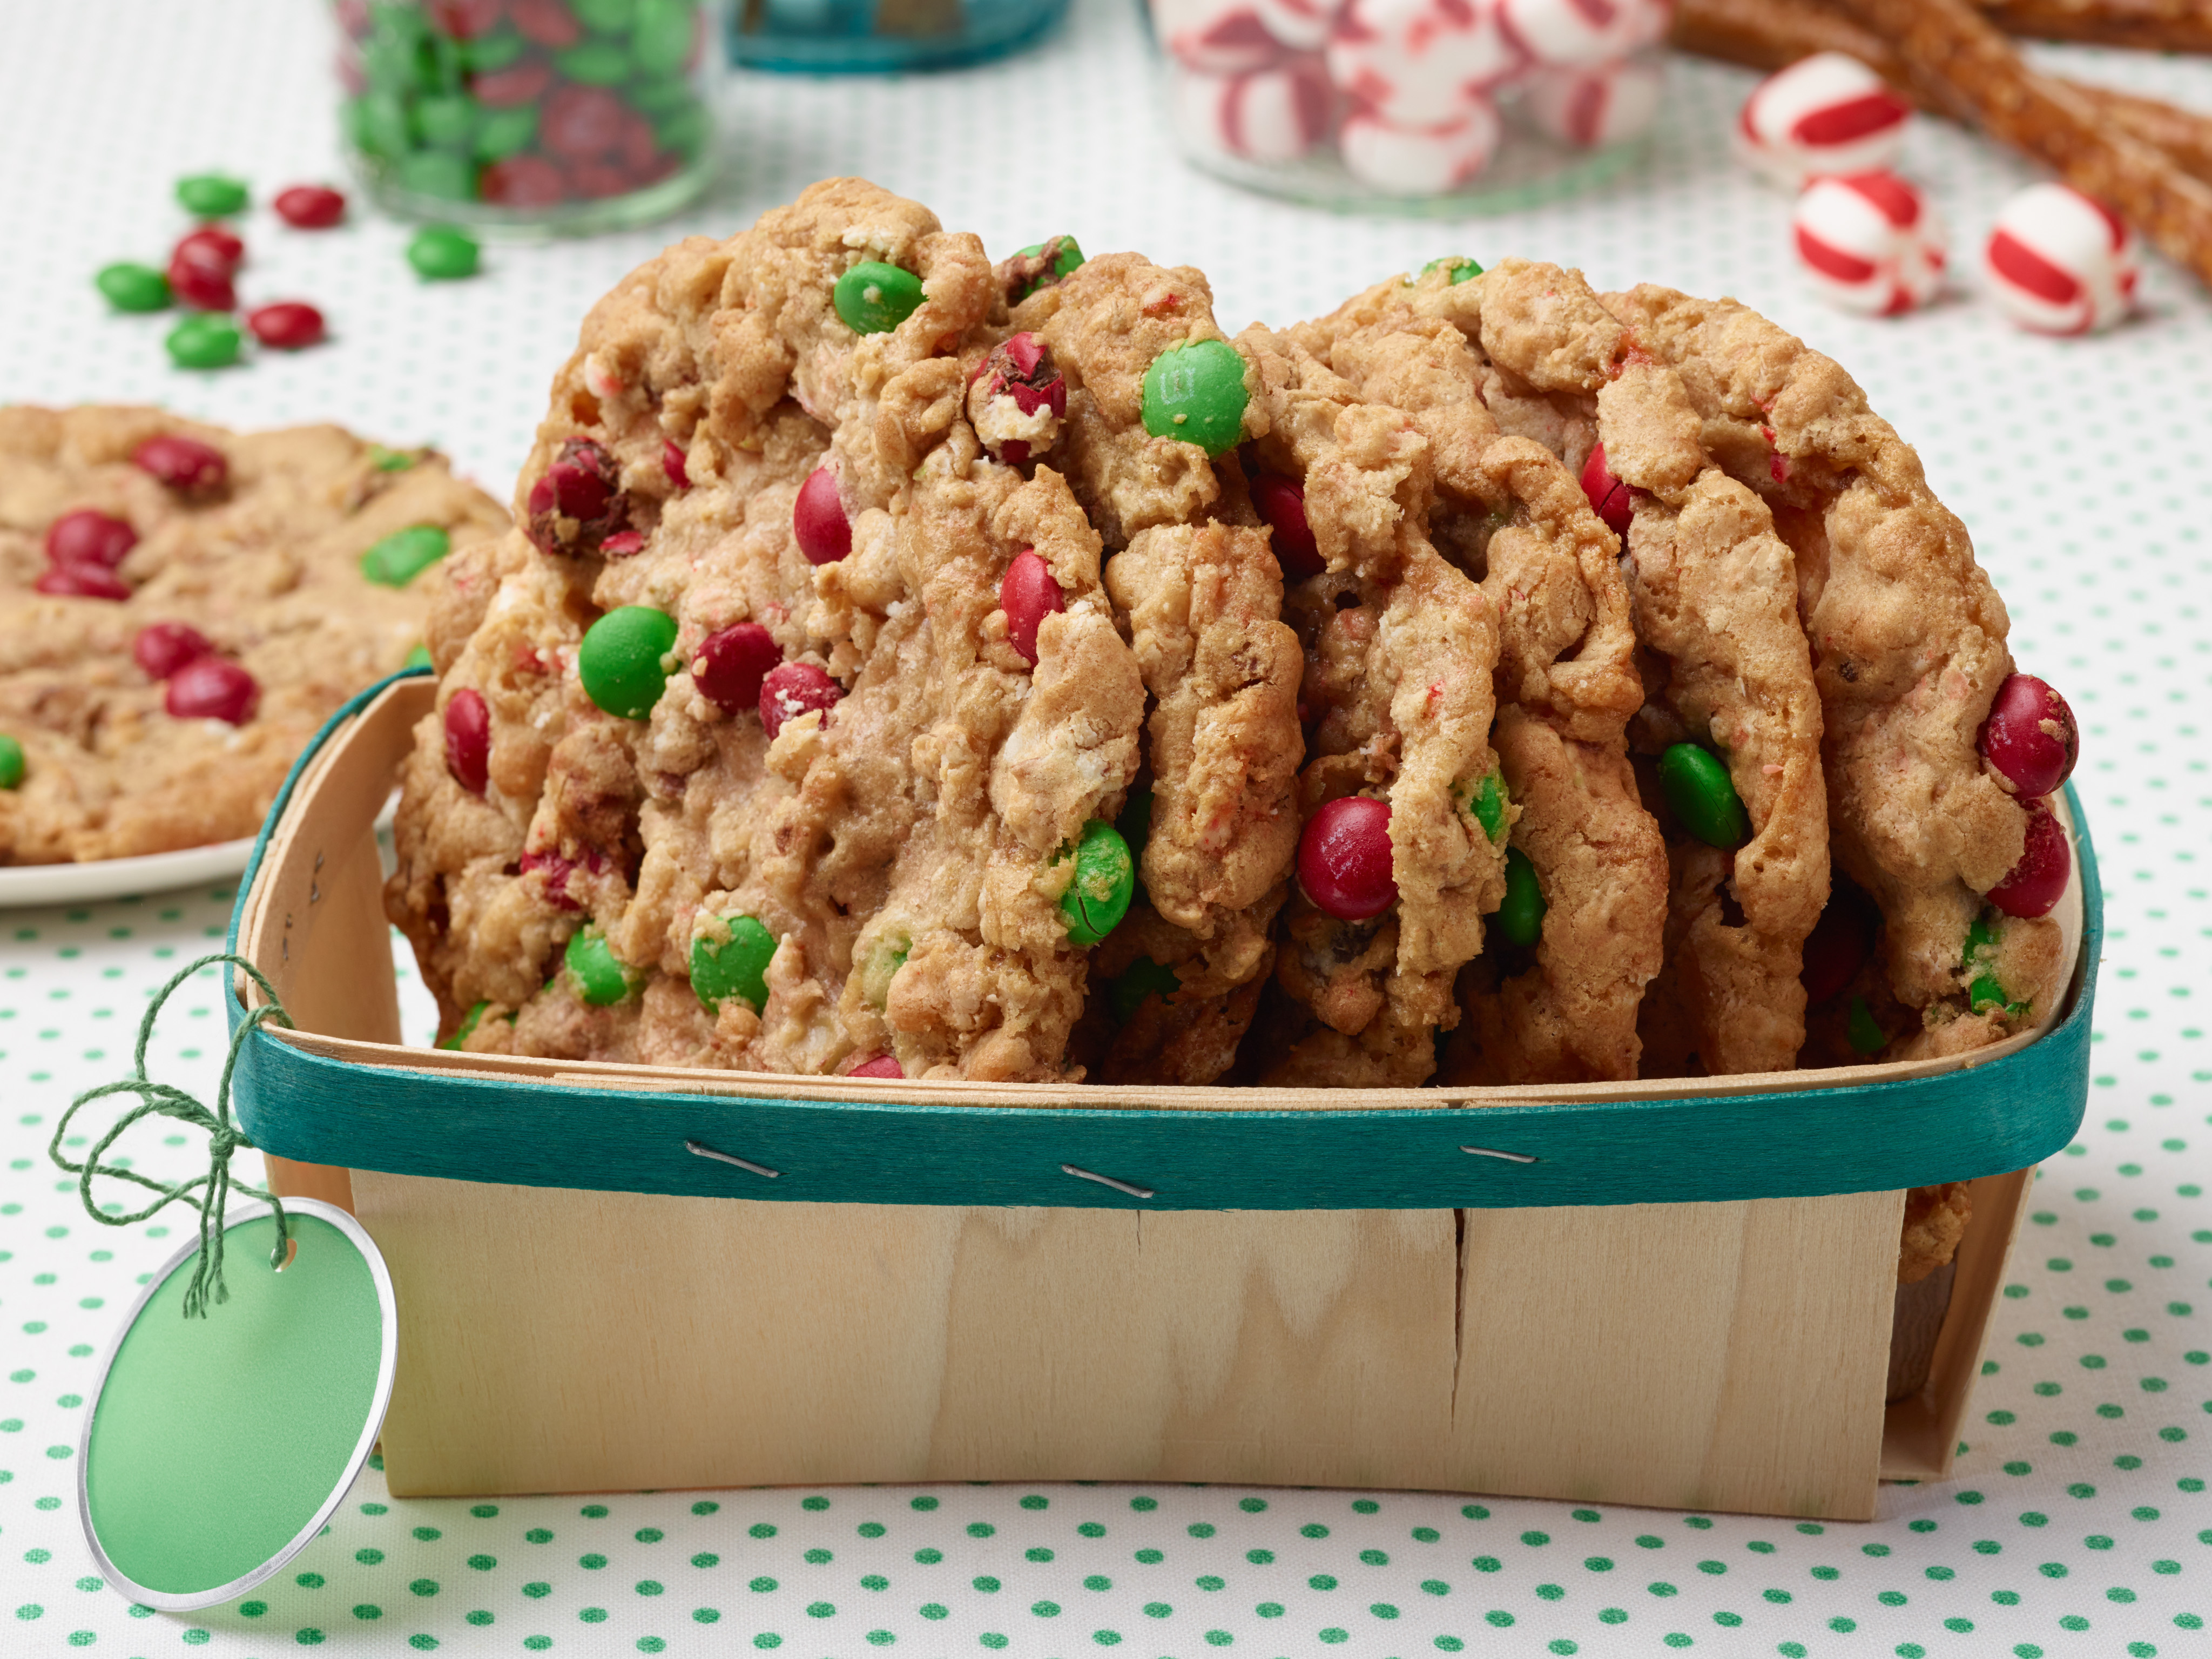 https://www.foodnetwork.com/content/dam/images/food/fullset/2016/9/20/1/FNK_Holiday-Monster-Cookies-with-Tag_s4x3.jpg